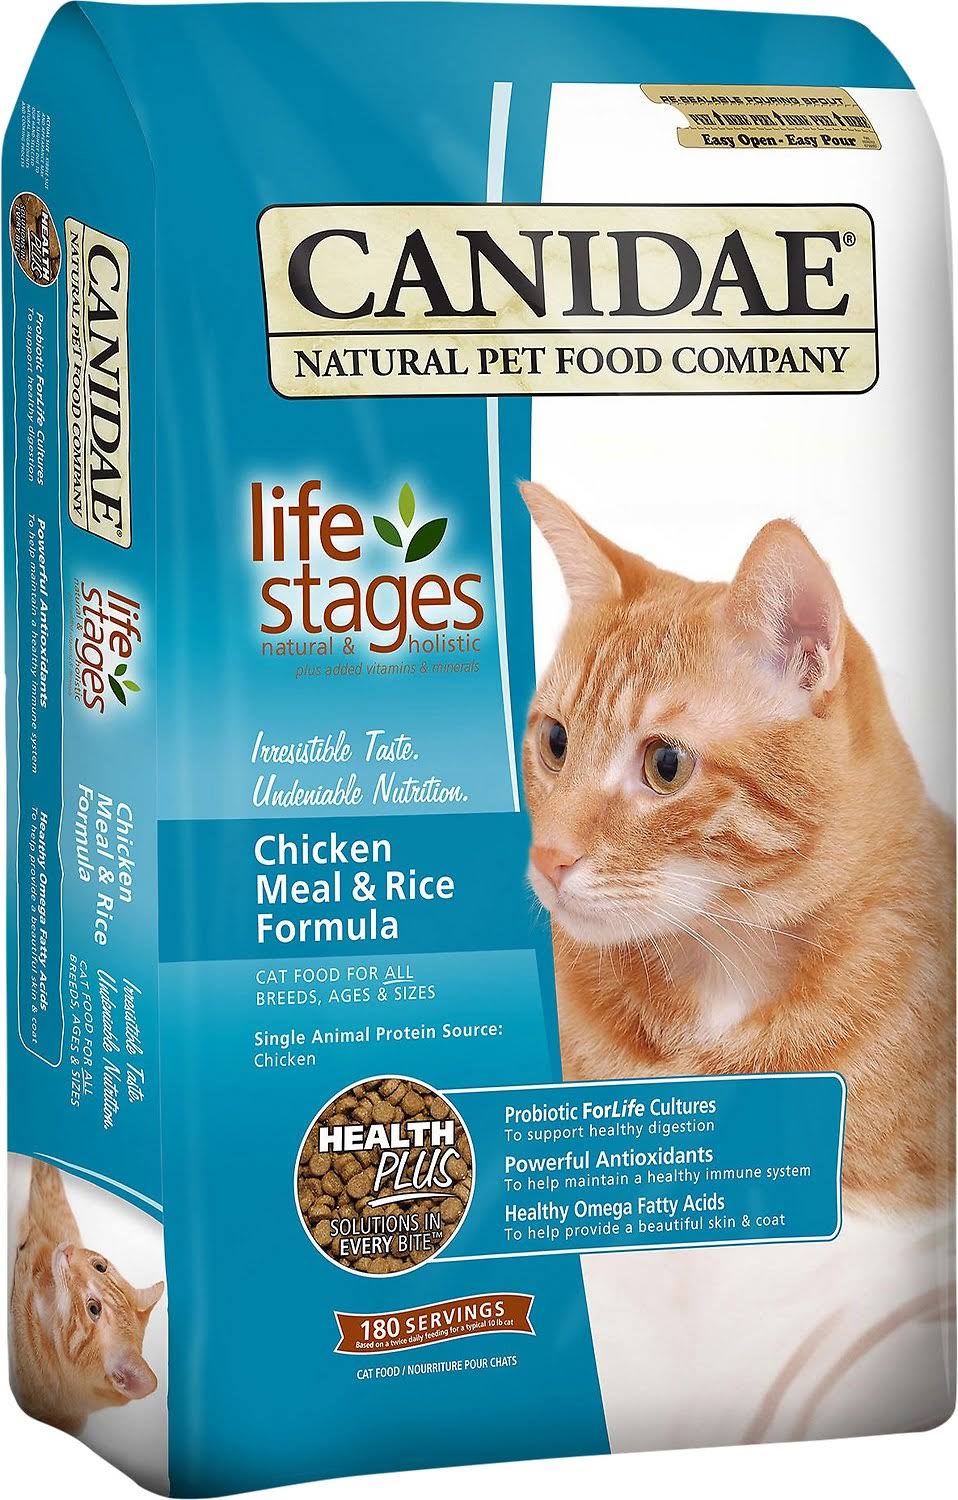 Canidae Pet Foods CD03104 All Life Stages Natural Cat Food - Chicken Meal and Rice, 4lb Bag